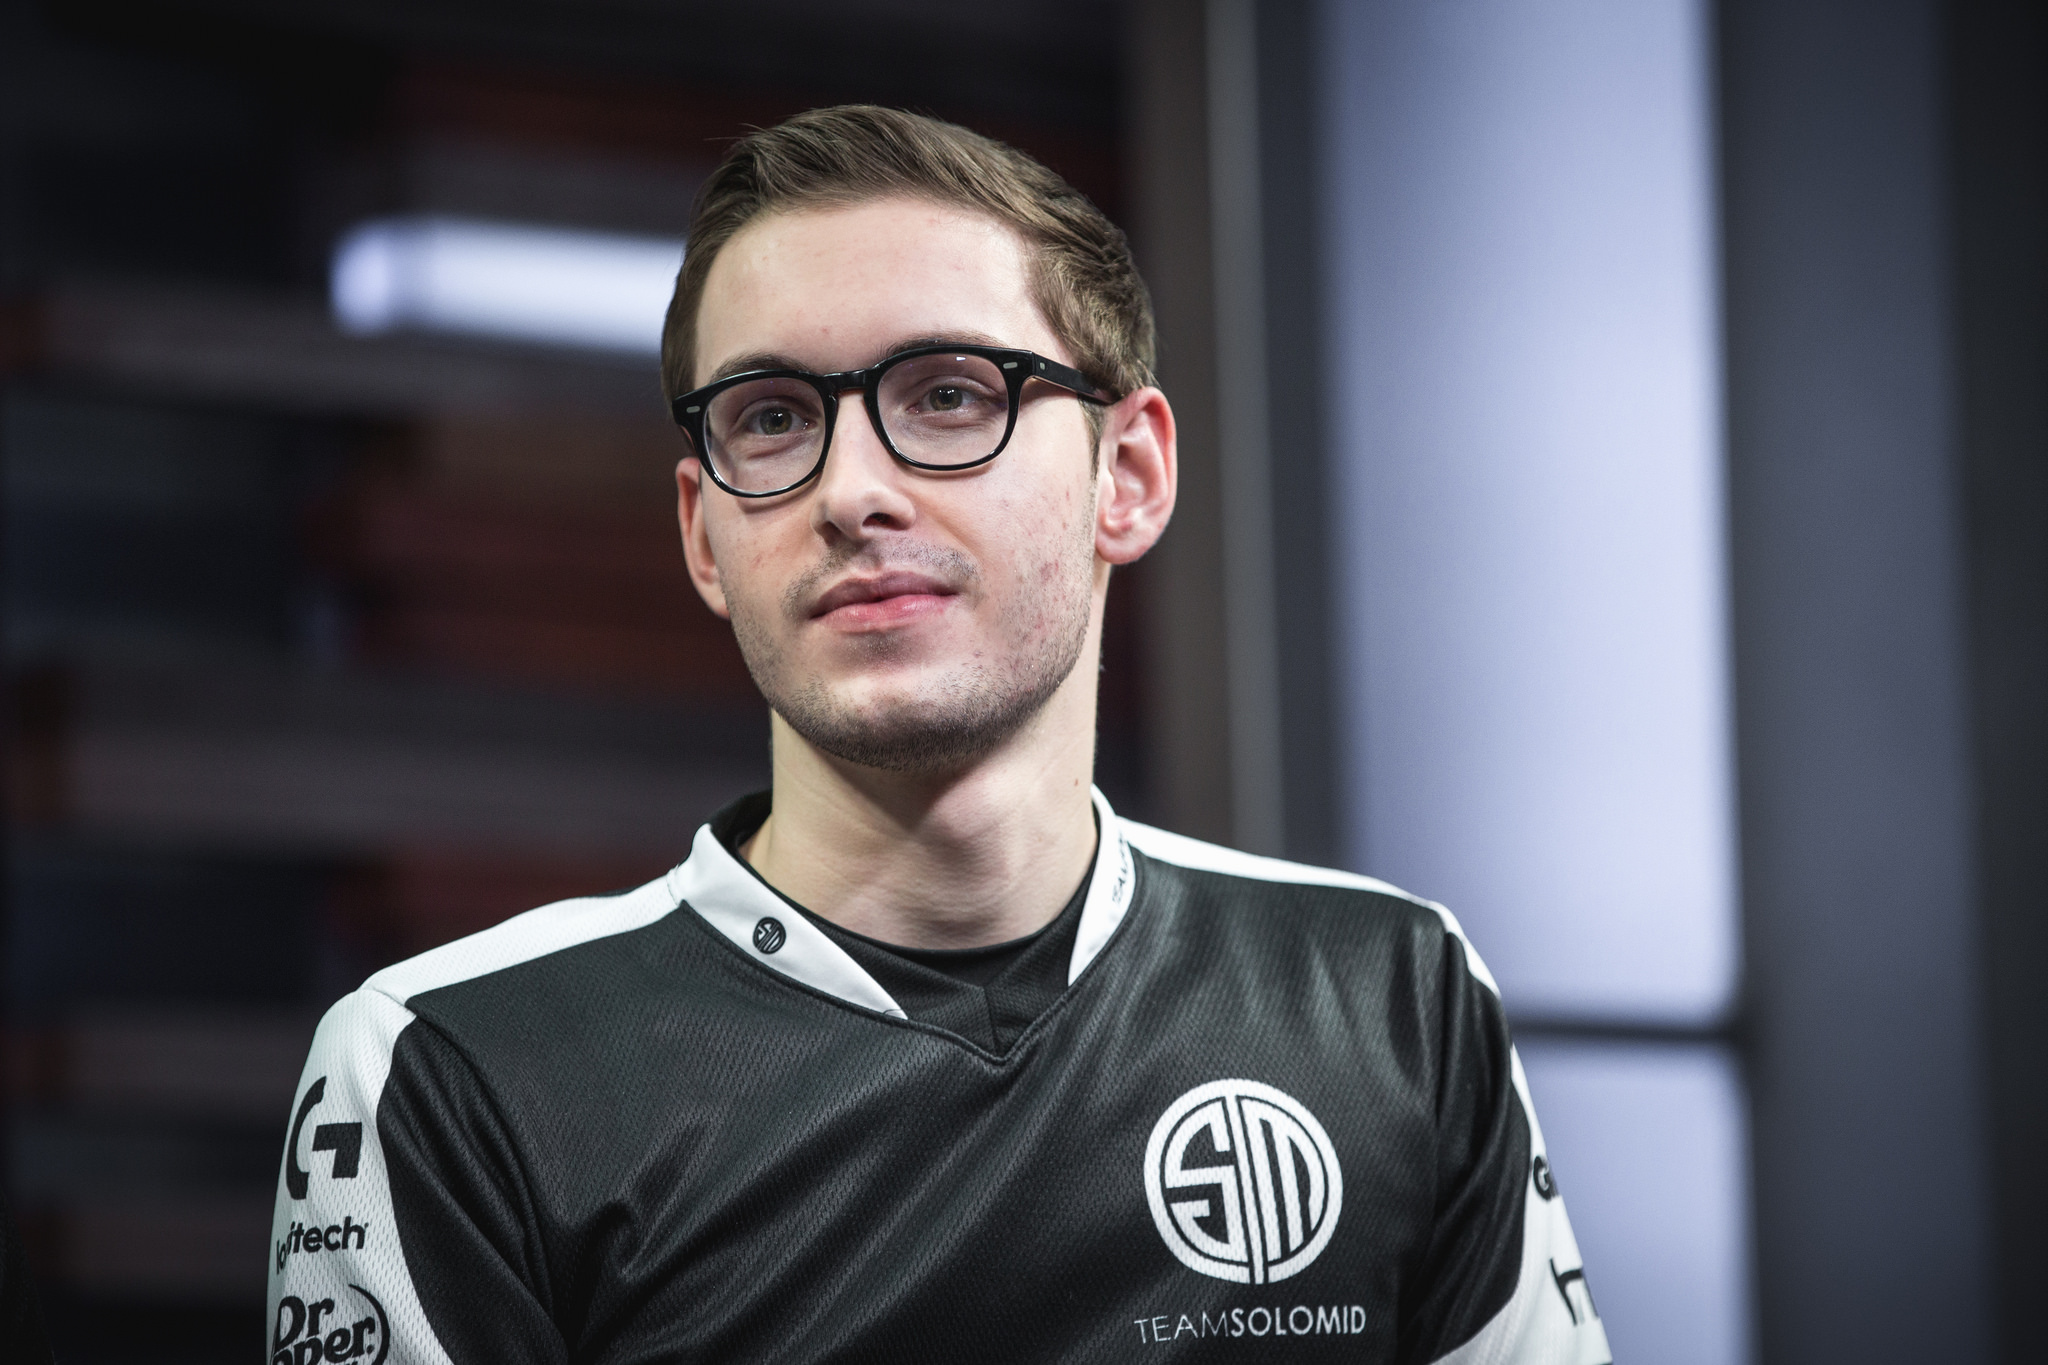 Bjergsen talks about how over-practicing has negatively affected his perfor...